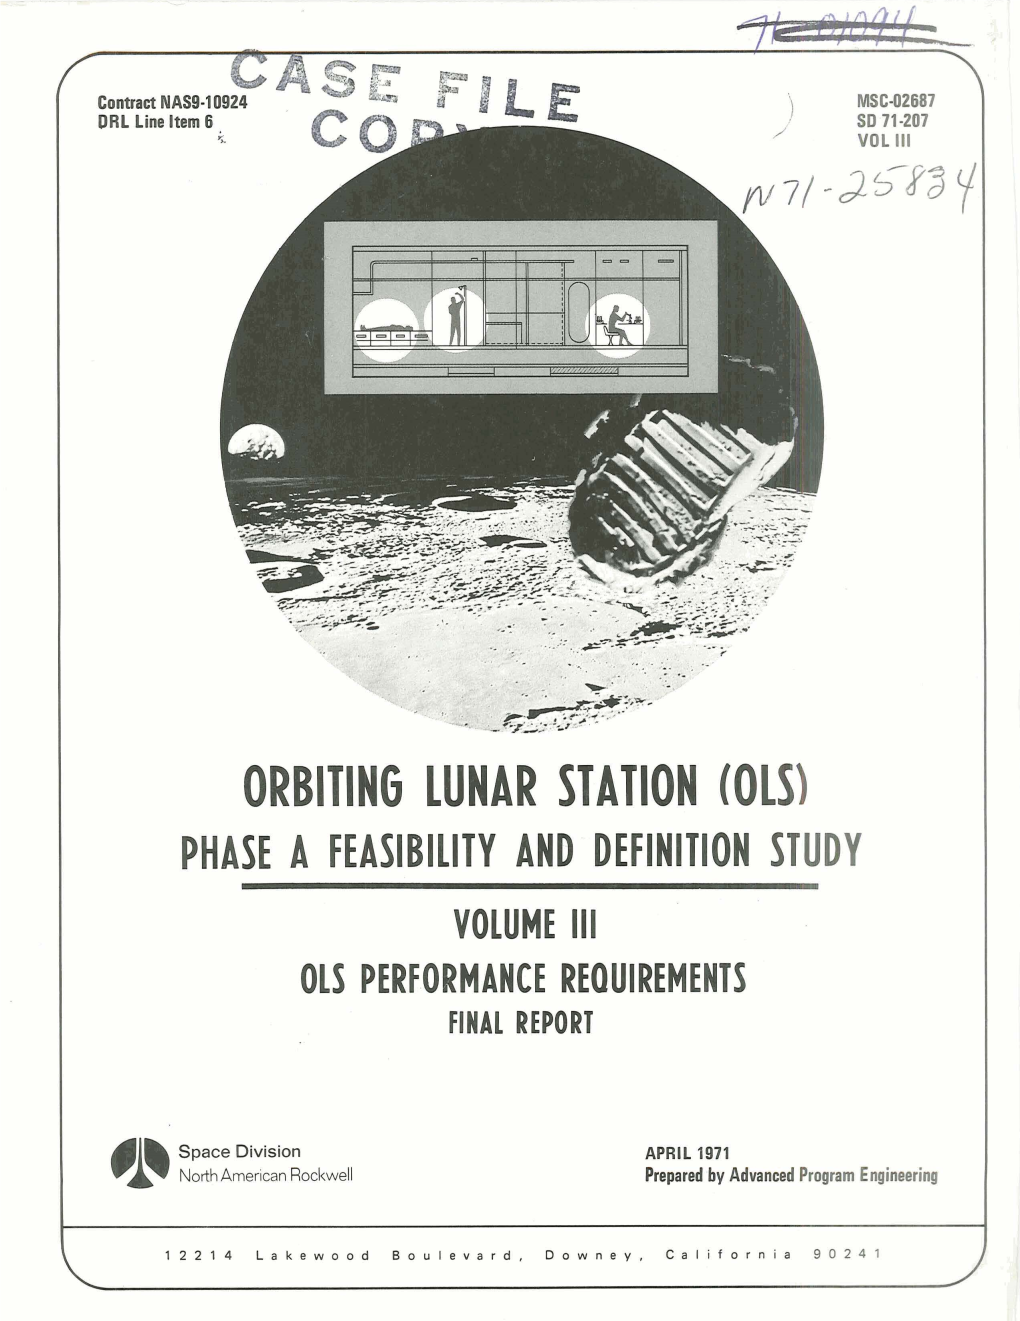 ORBITING LUNAR STATION (015) PHASE a FEASIBILITY and DEFINITION STUDY VOLUME Ill OLS PERFORMANCE REQUIREMENTS FINAL REPORT